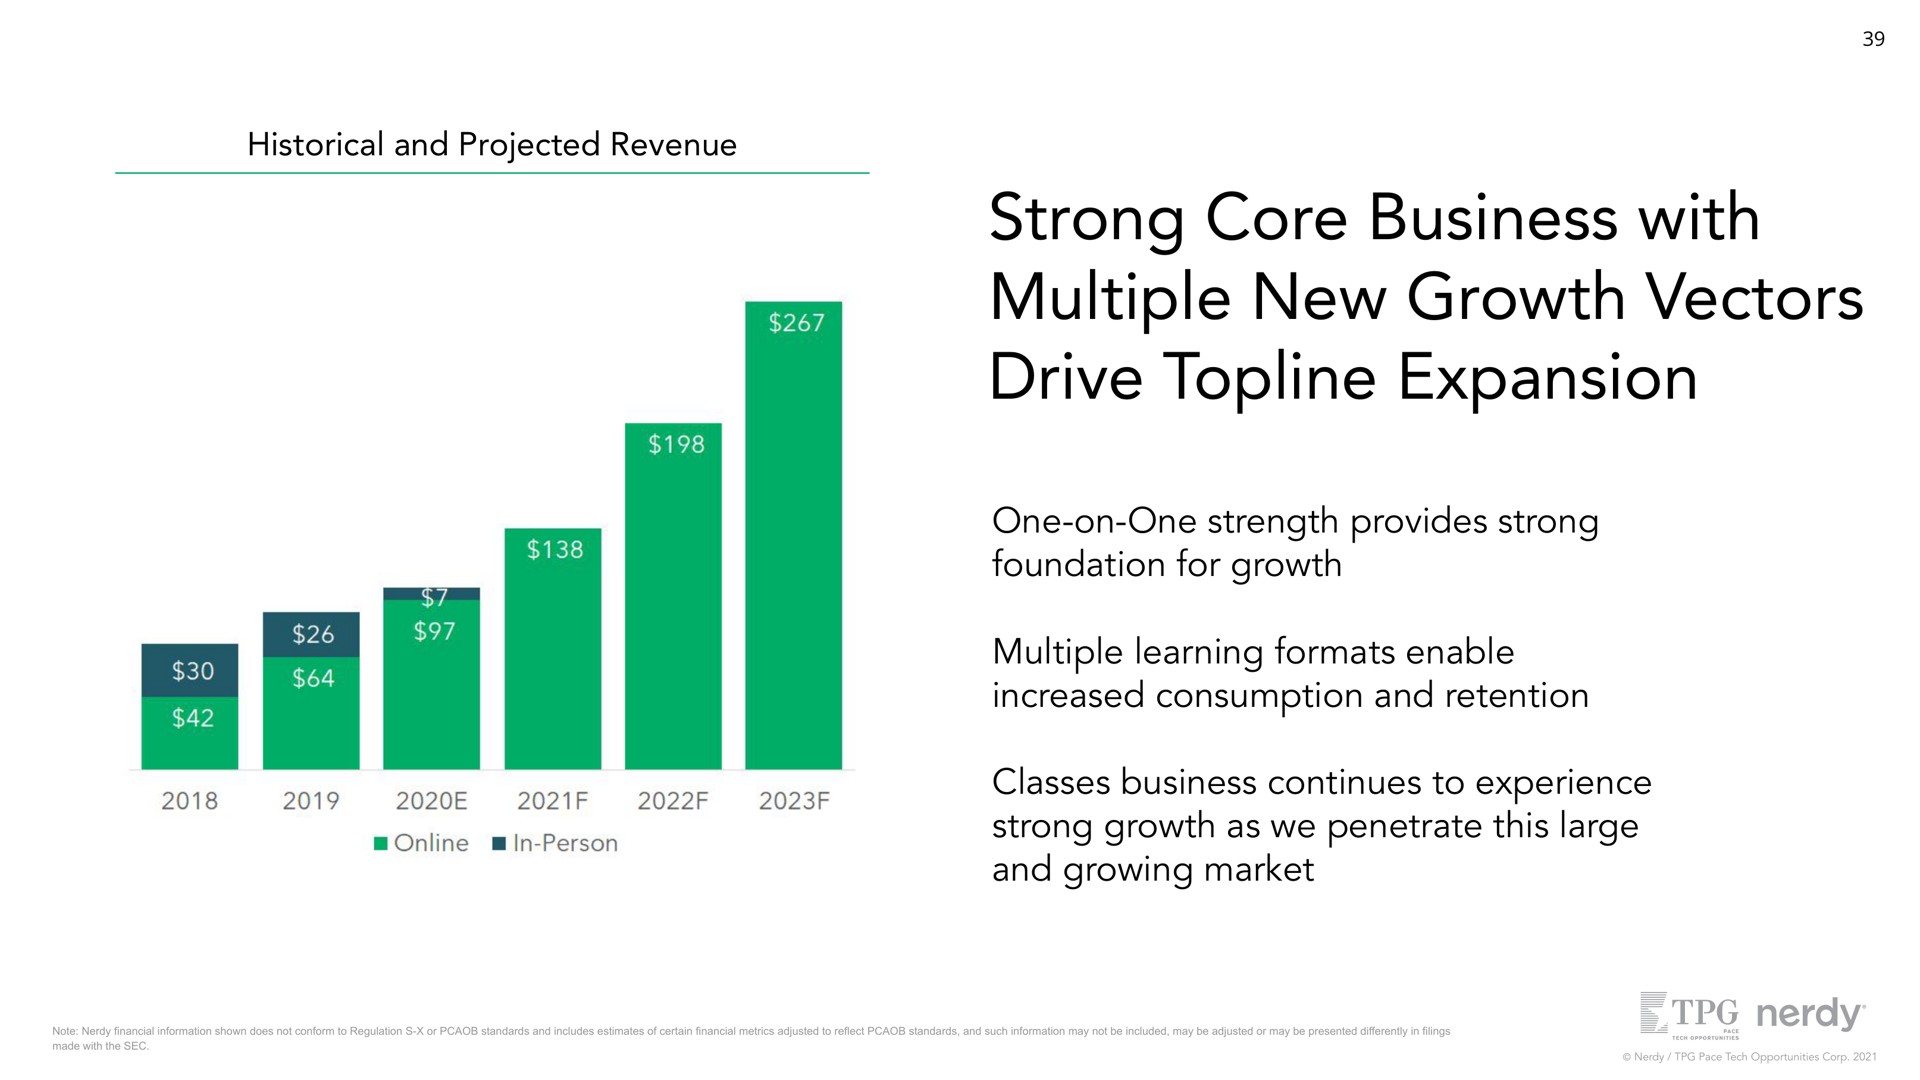 historical and projected revenue strong core business with multiple new growth vectors drive topline expansion one on one strength provides strong foundation for growth multiple learning formats enable increased consumption and retention classes business continues to experience strong growth as we penetrate this large and growing market via subject coverage classes business exits incubation period and experiences strong growth | Nerdy